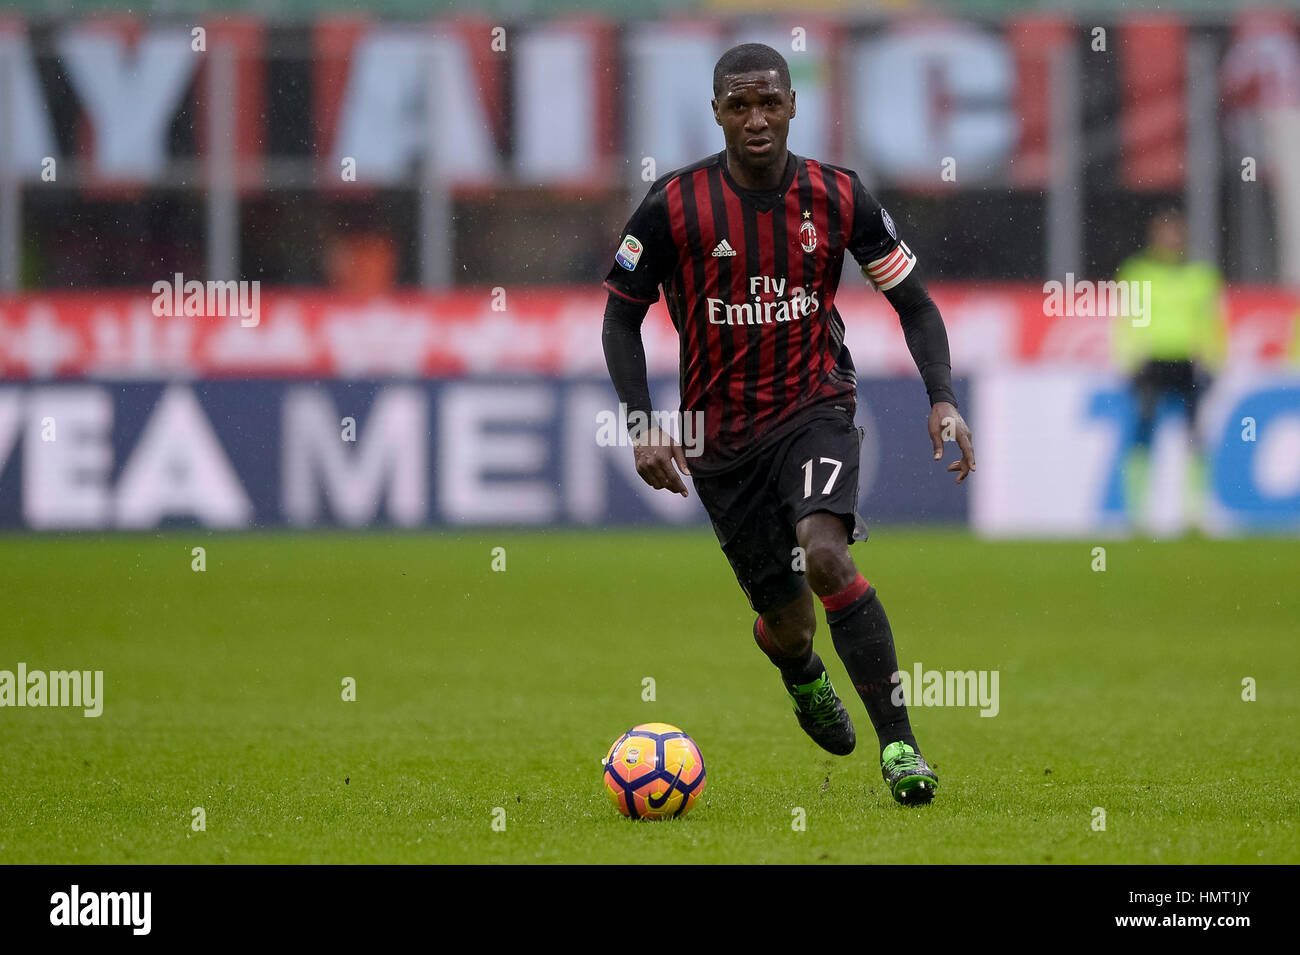 Milan, Italy. 5th Feb, 2017. Cristian Zapata of AC Milan in action during the Serie A football match between AC Milan and UC Sampdoria. Credit: Nicolò Campo/Alamy Live News Stock Photo